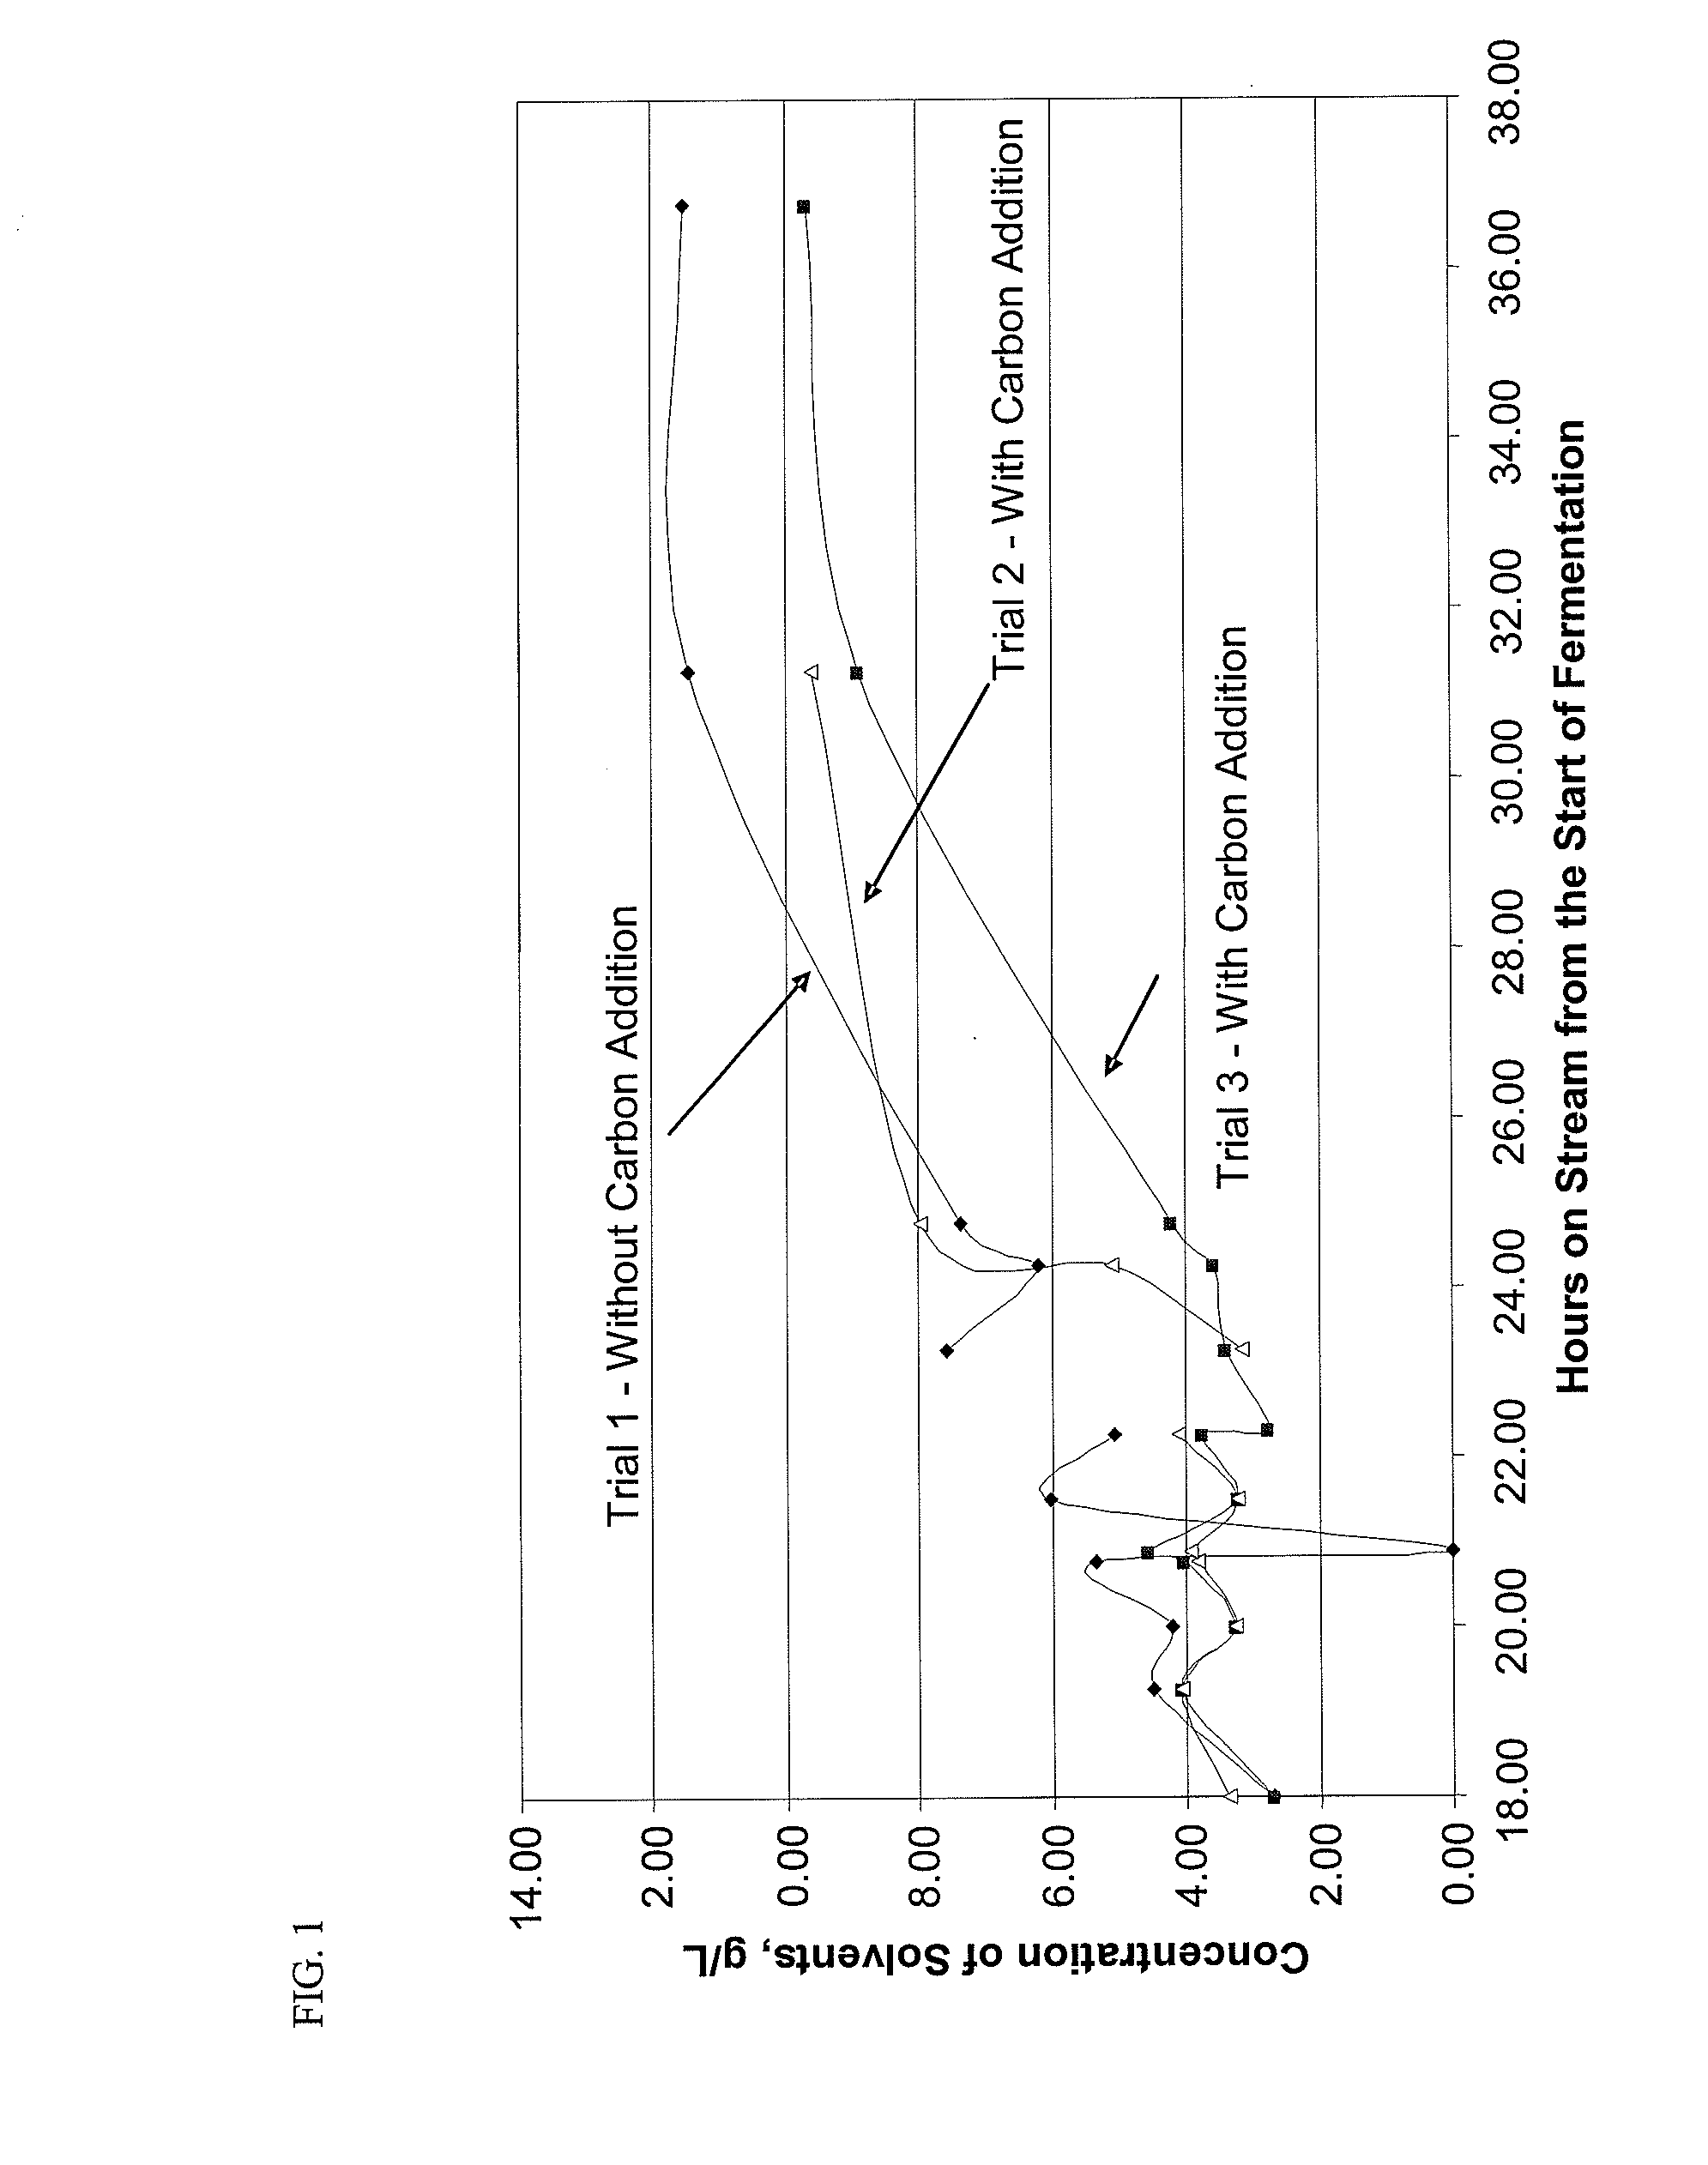 Process for solvent production utilizing liquid phase adsorption